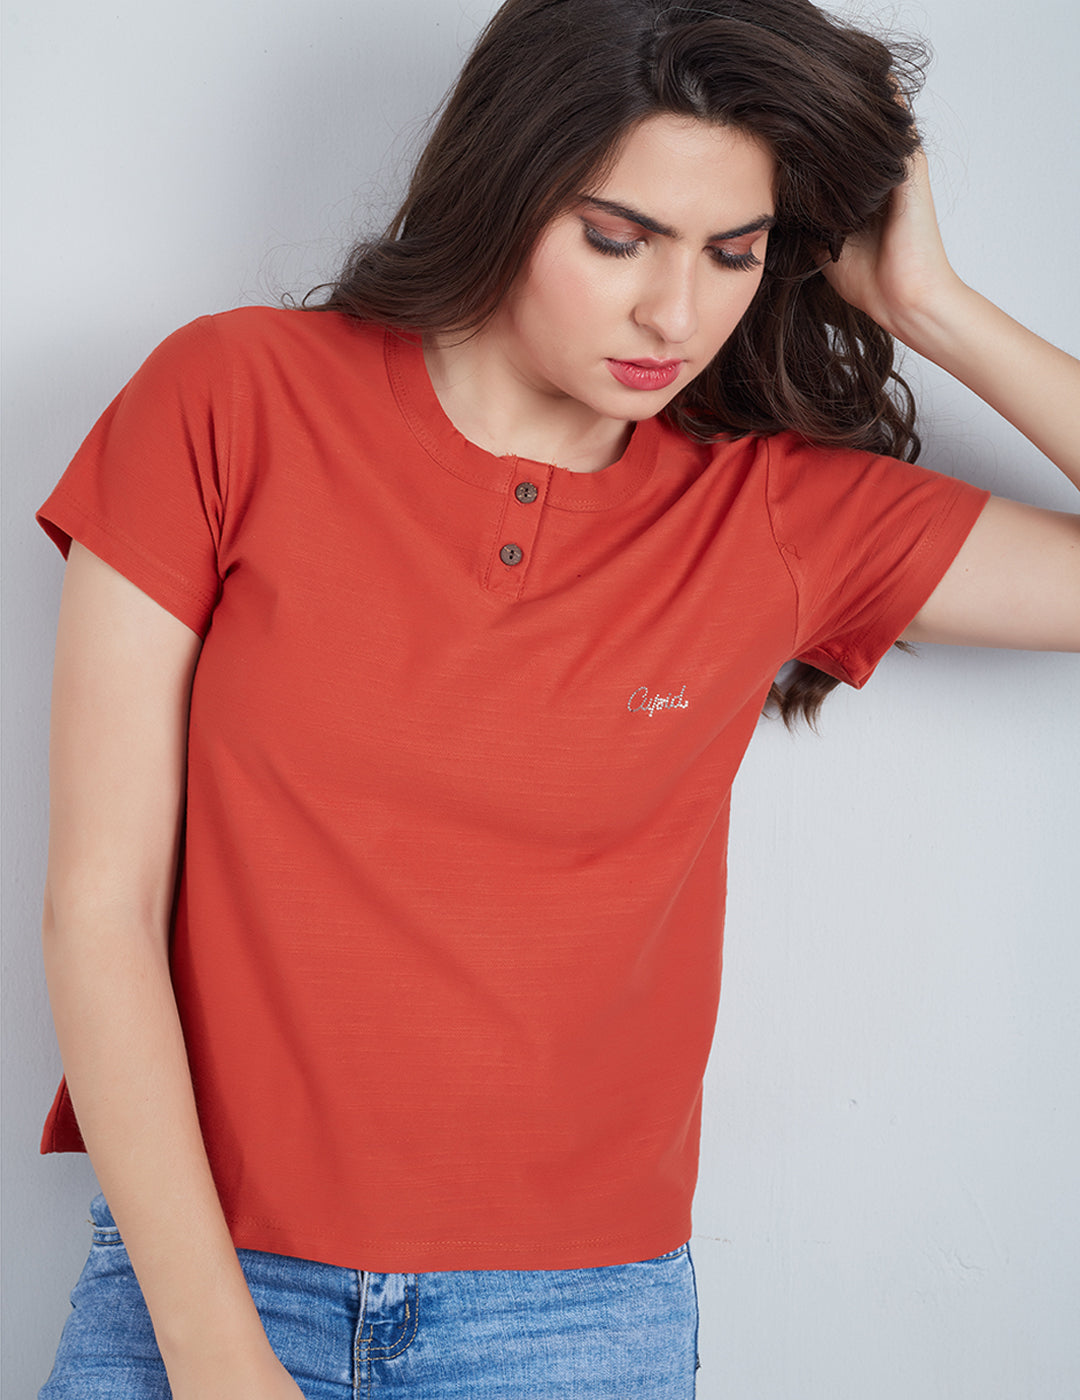 Stylish Rust Plain Cotton Short T-shirts For Women Online In India